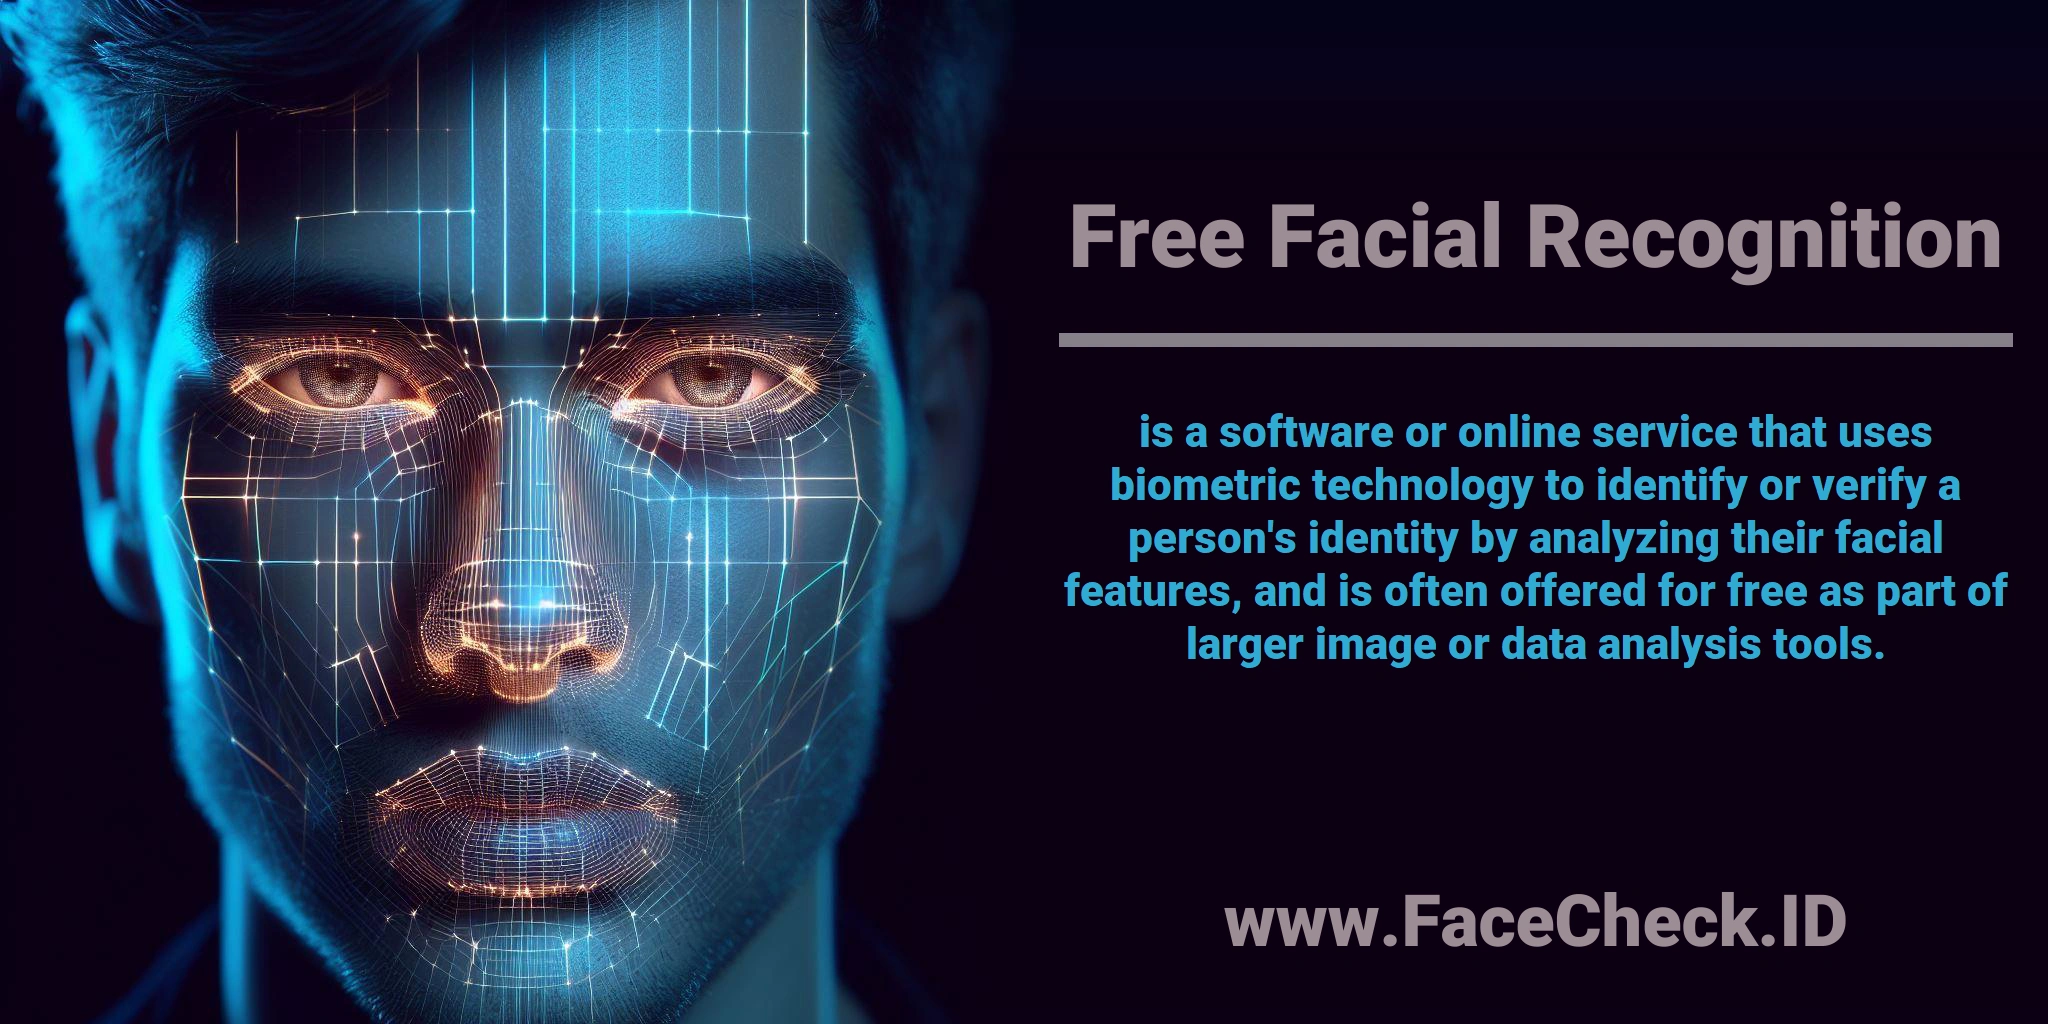 <b>Free Facial Recognition</b> is a software or online service that uses biometric technology to identify or verify a person's identity by analyzing their facial features, and is often offered for free as part of larger image or data analysis tools.
